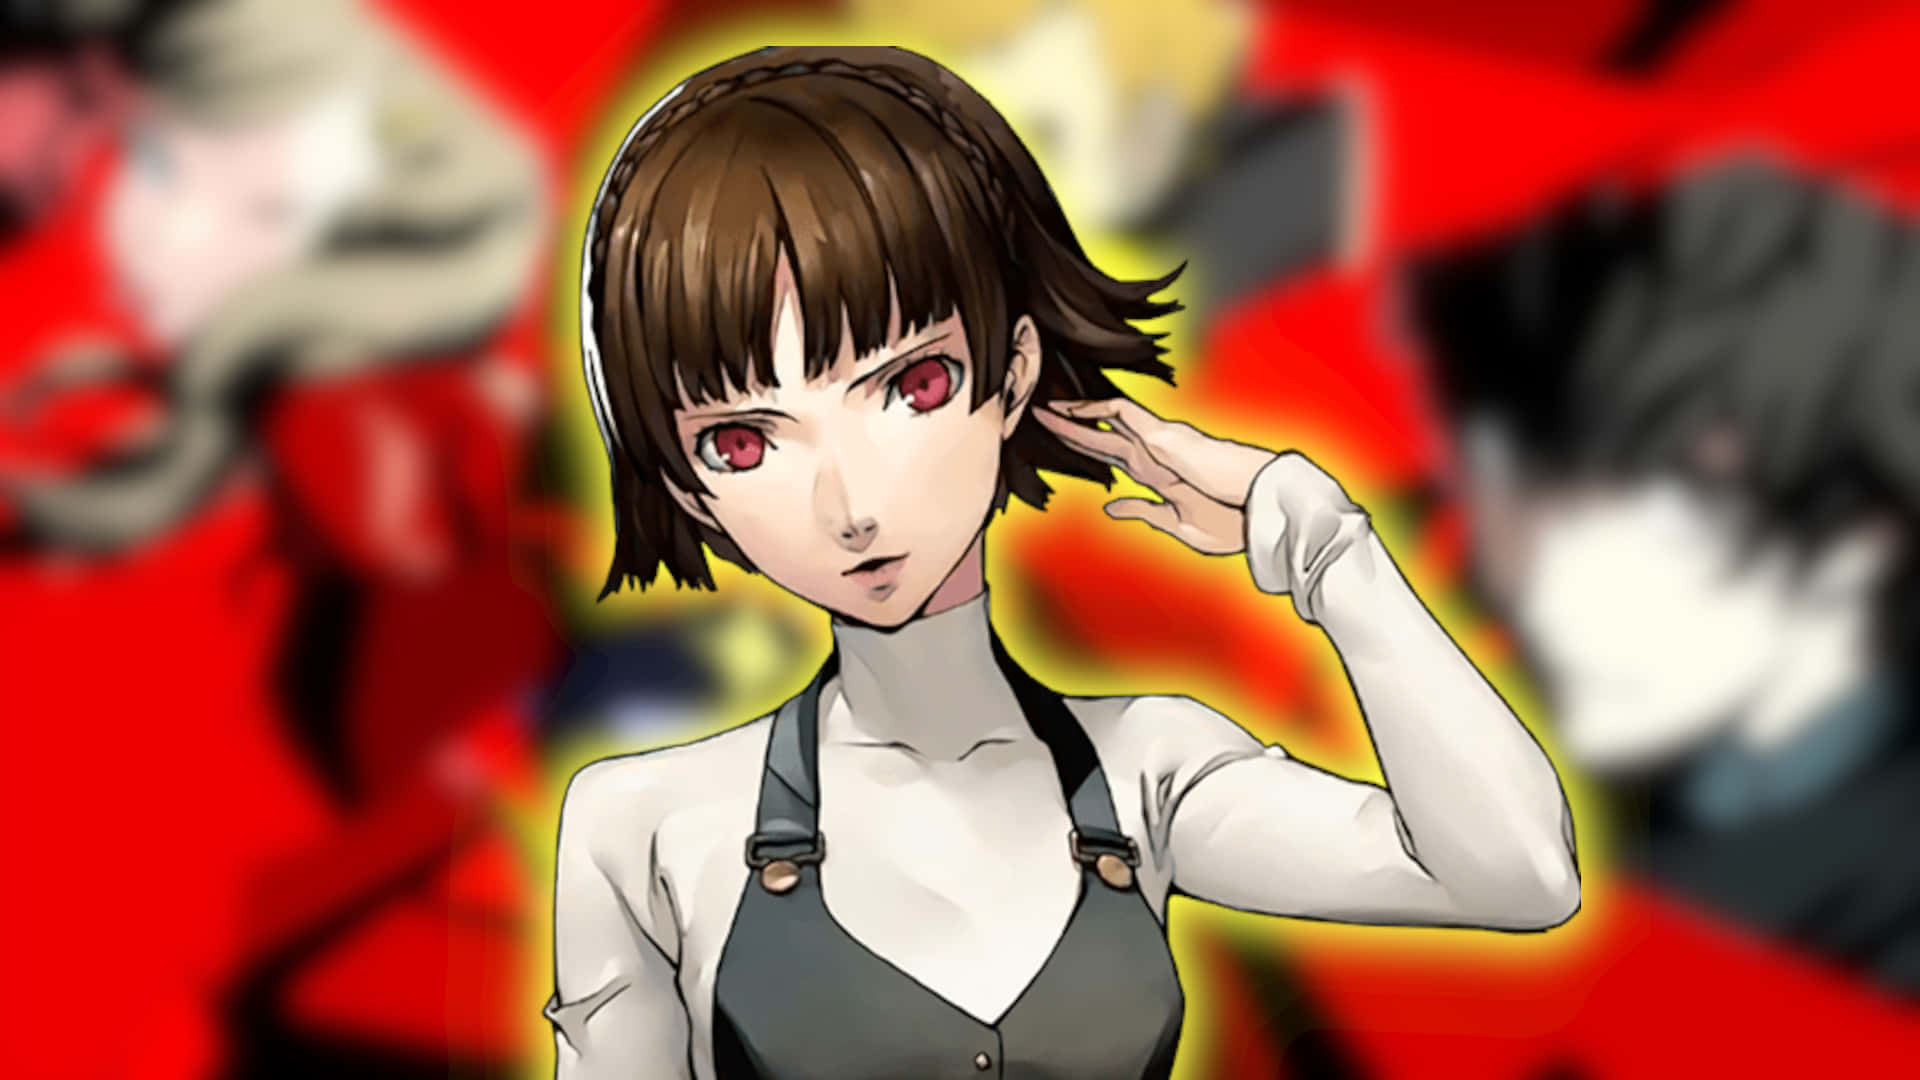 Jin, Protagonist of Persona 5